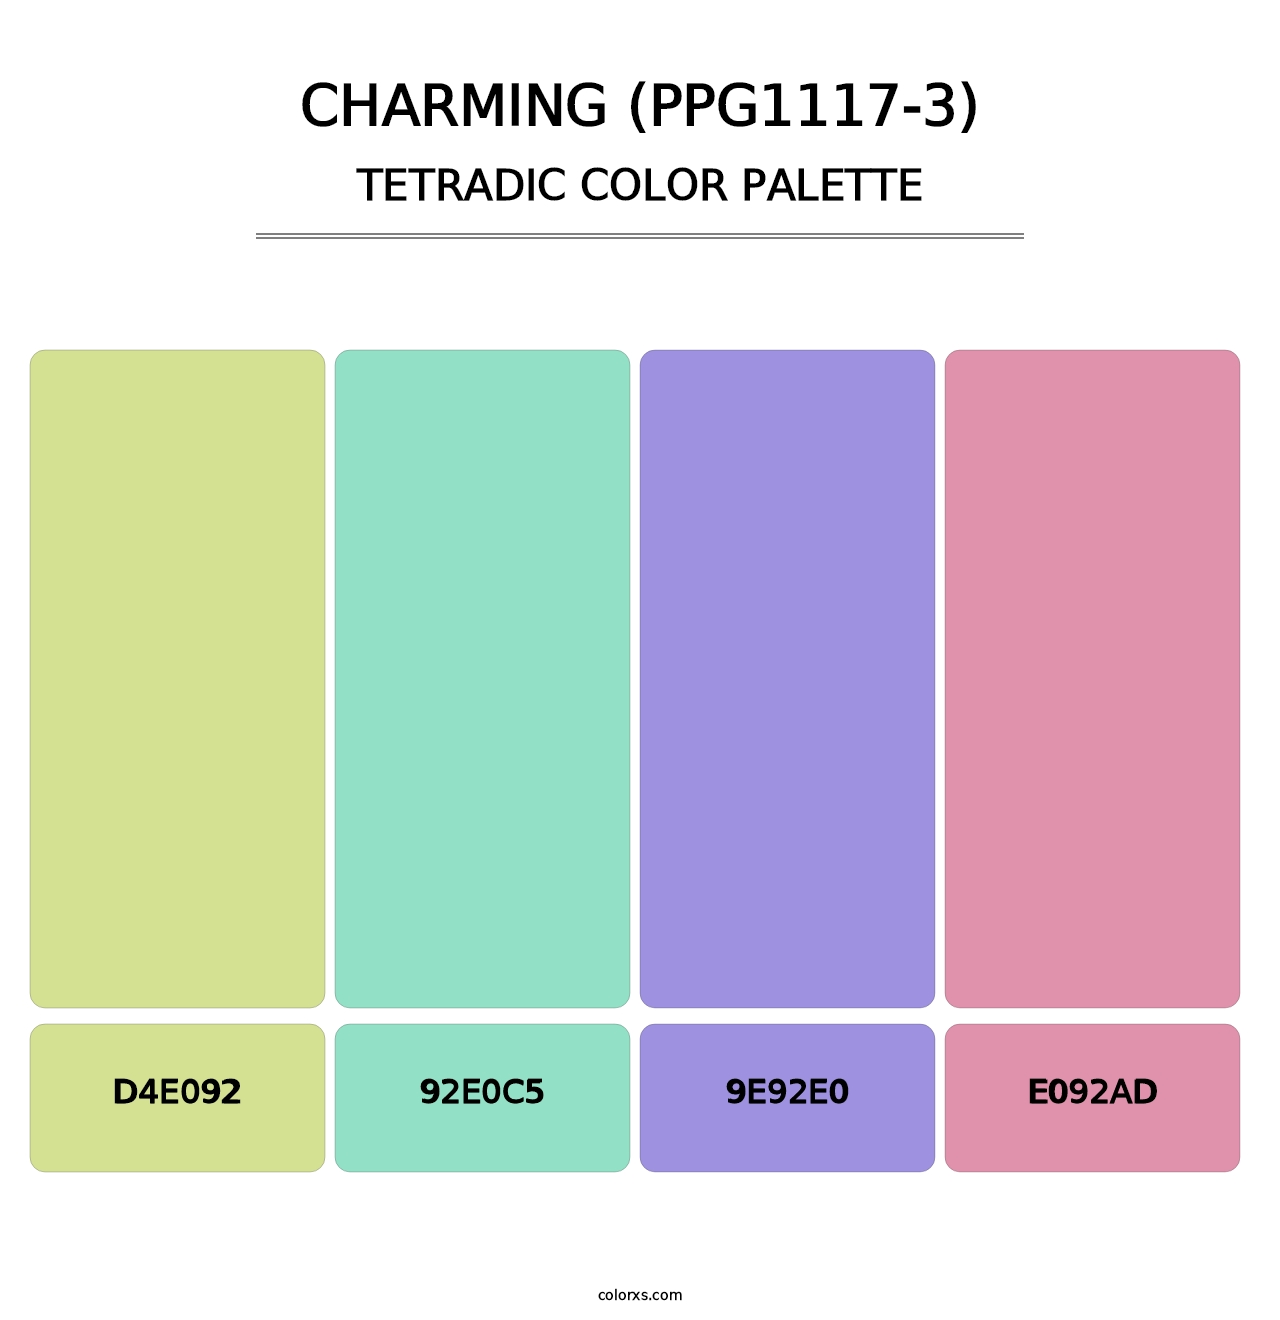 Charming (PPG1117-3) - Tetradic Color Palette